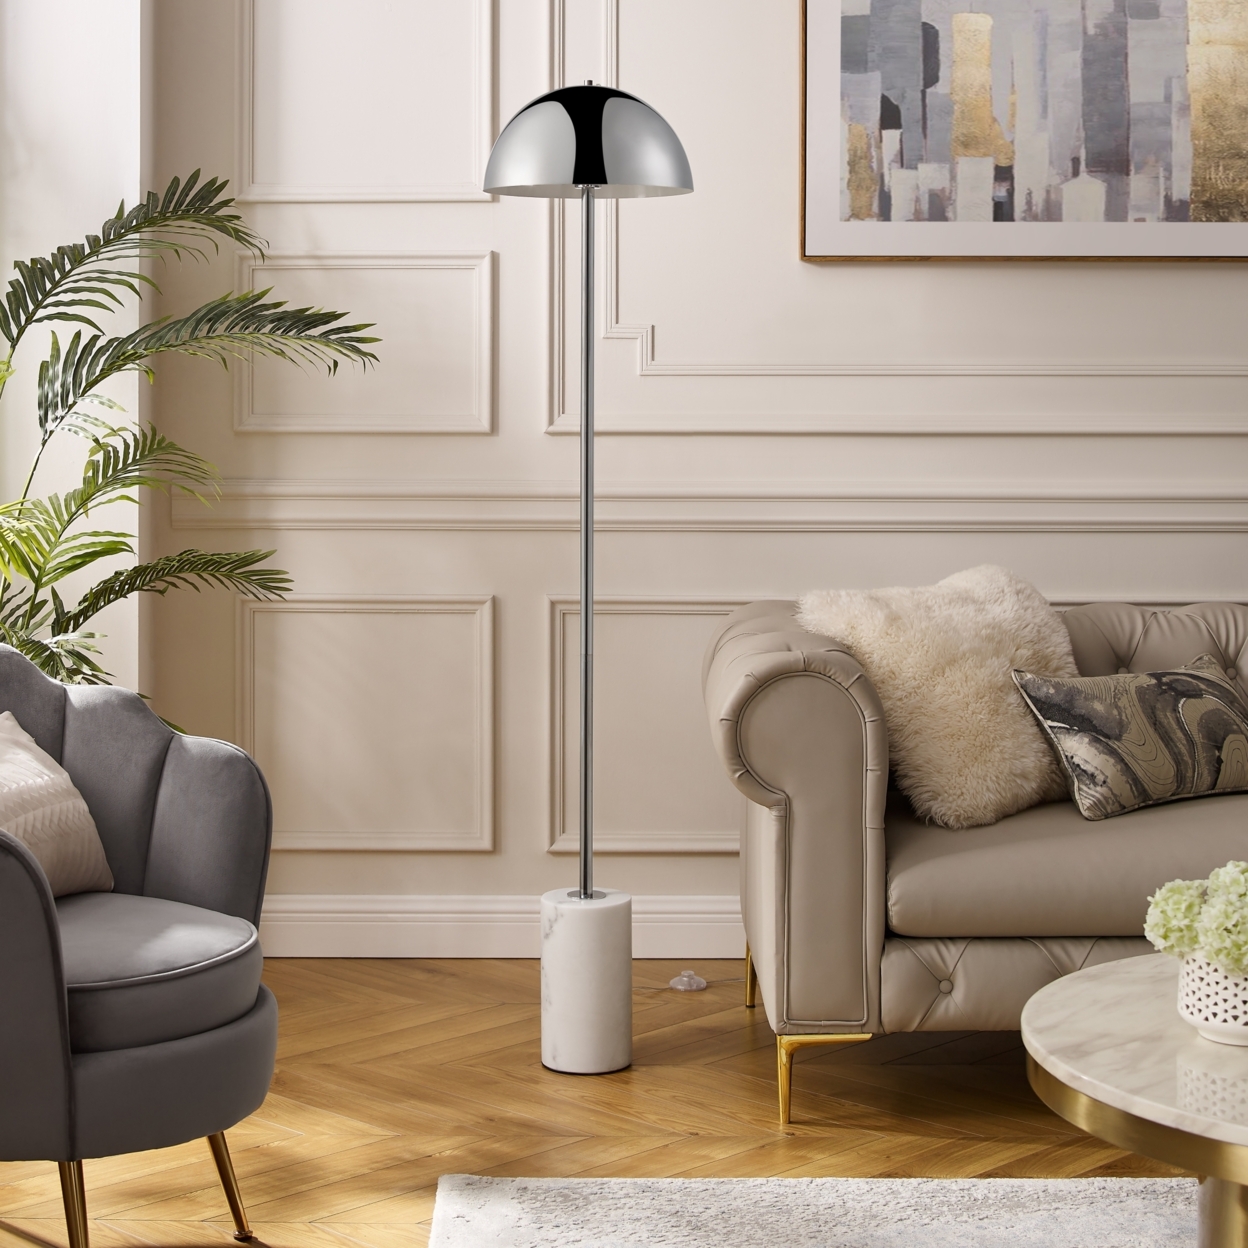 Marlen Floor Lamp - 6ft Power Cord, Marble Stone Base , Sturdy Metal Frame , Foot Switch - Chrome